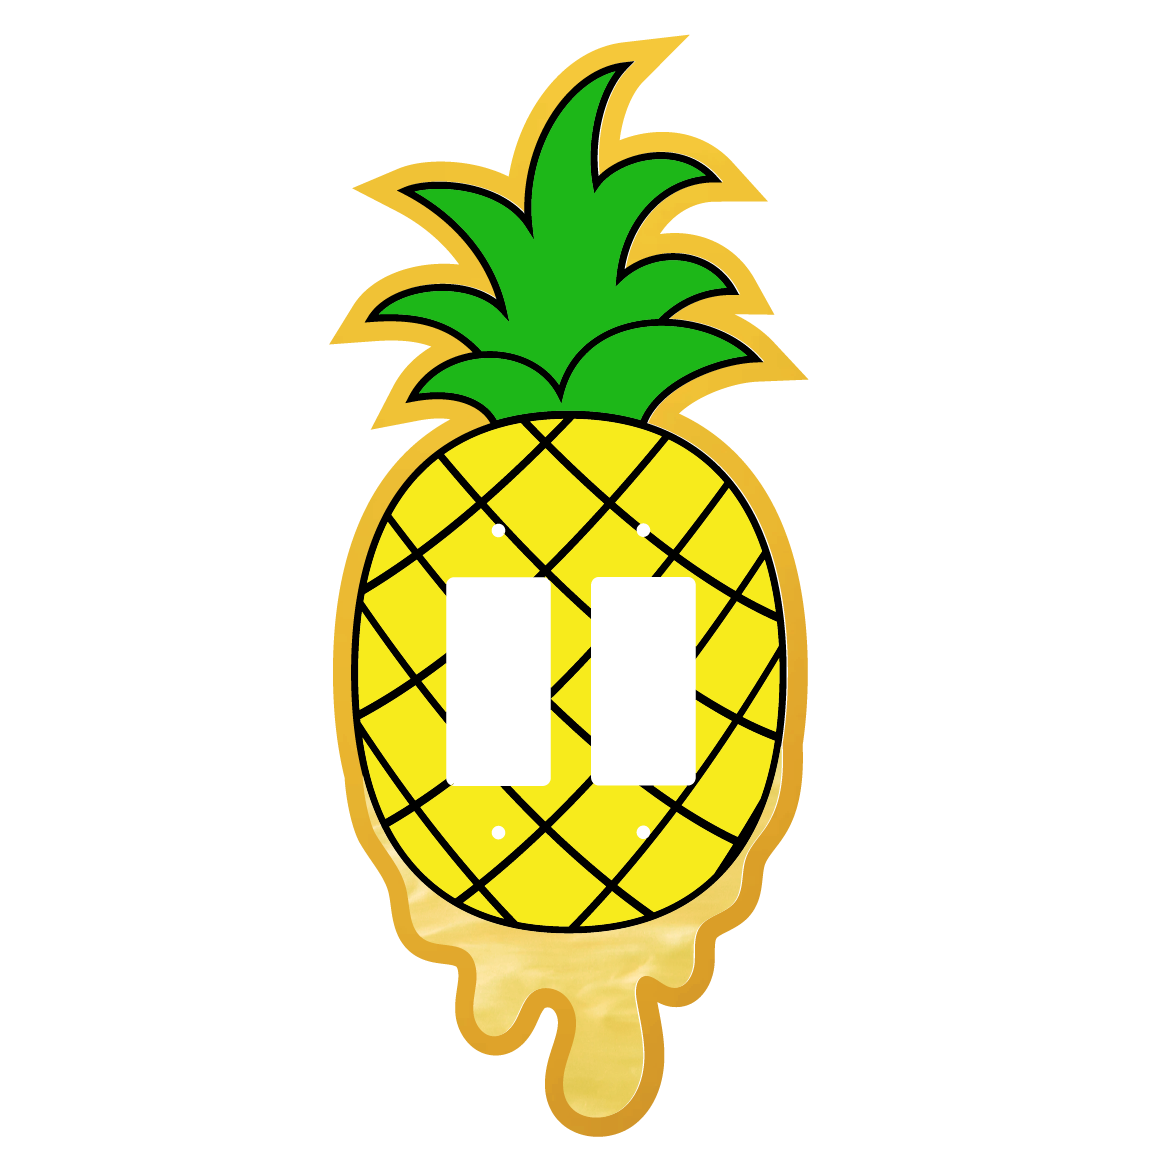 The Pineapple Light Switch Cover